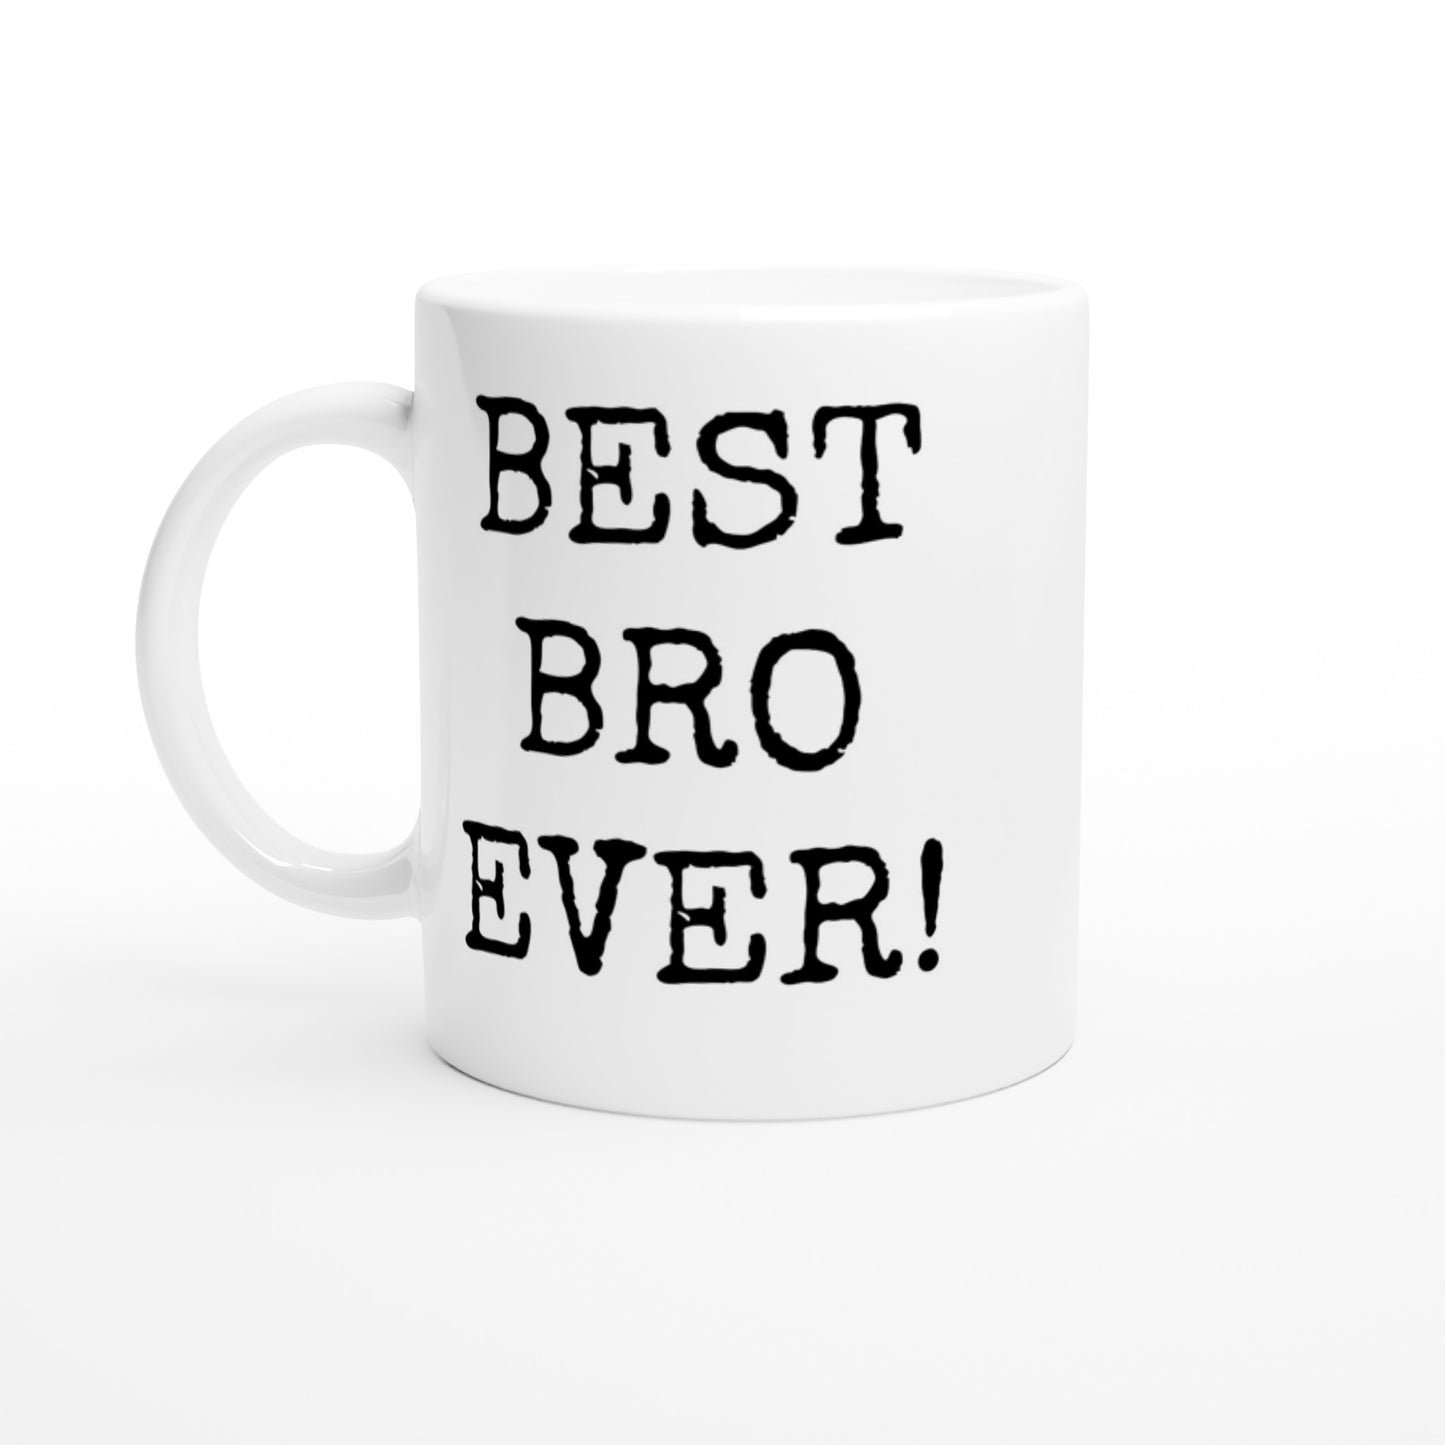 best bro ever mug, coffee cup, brother gift.